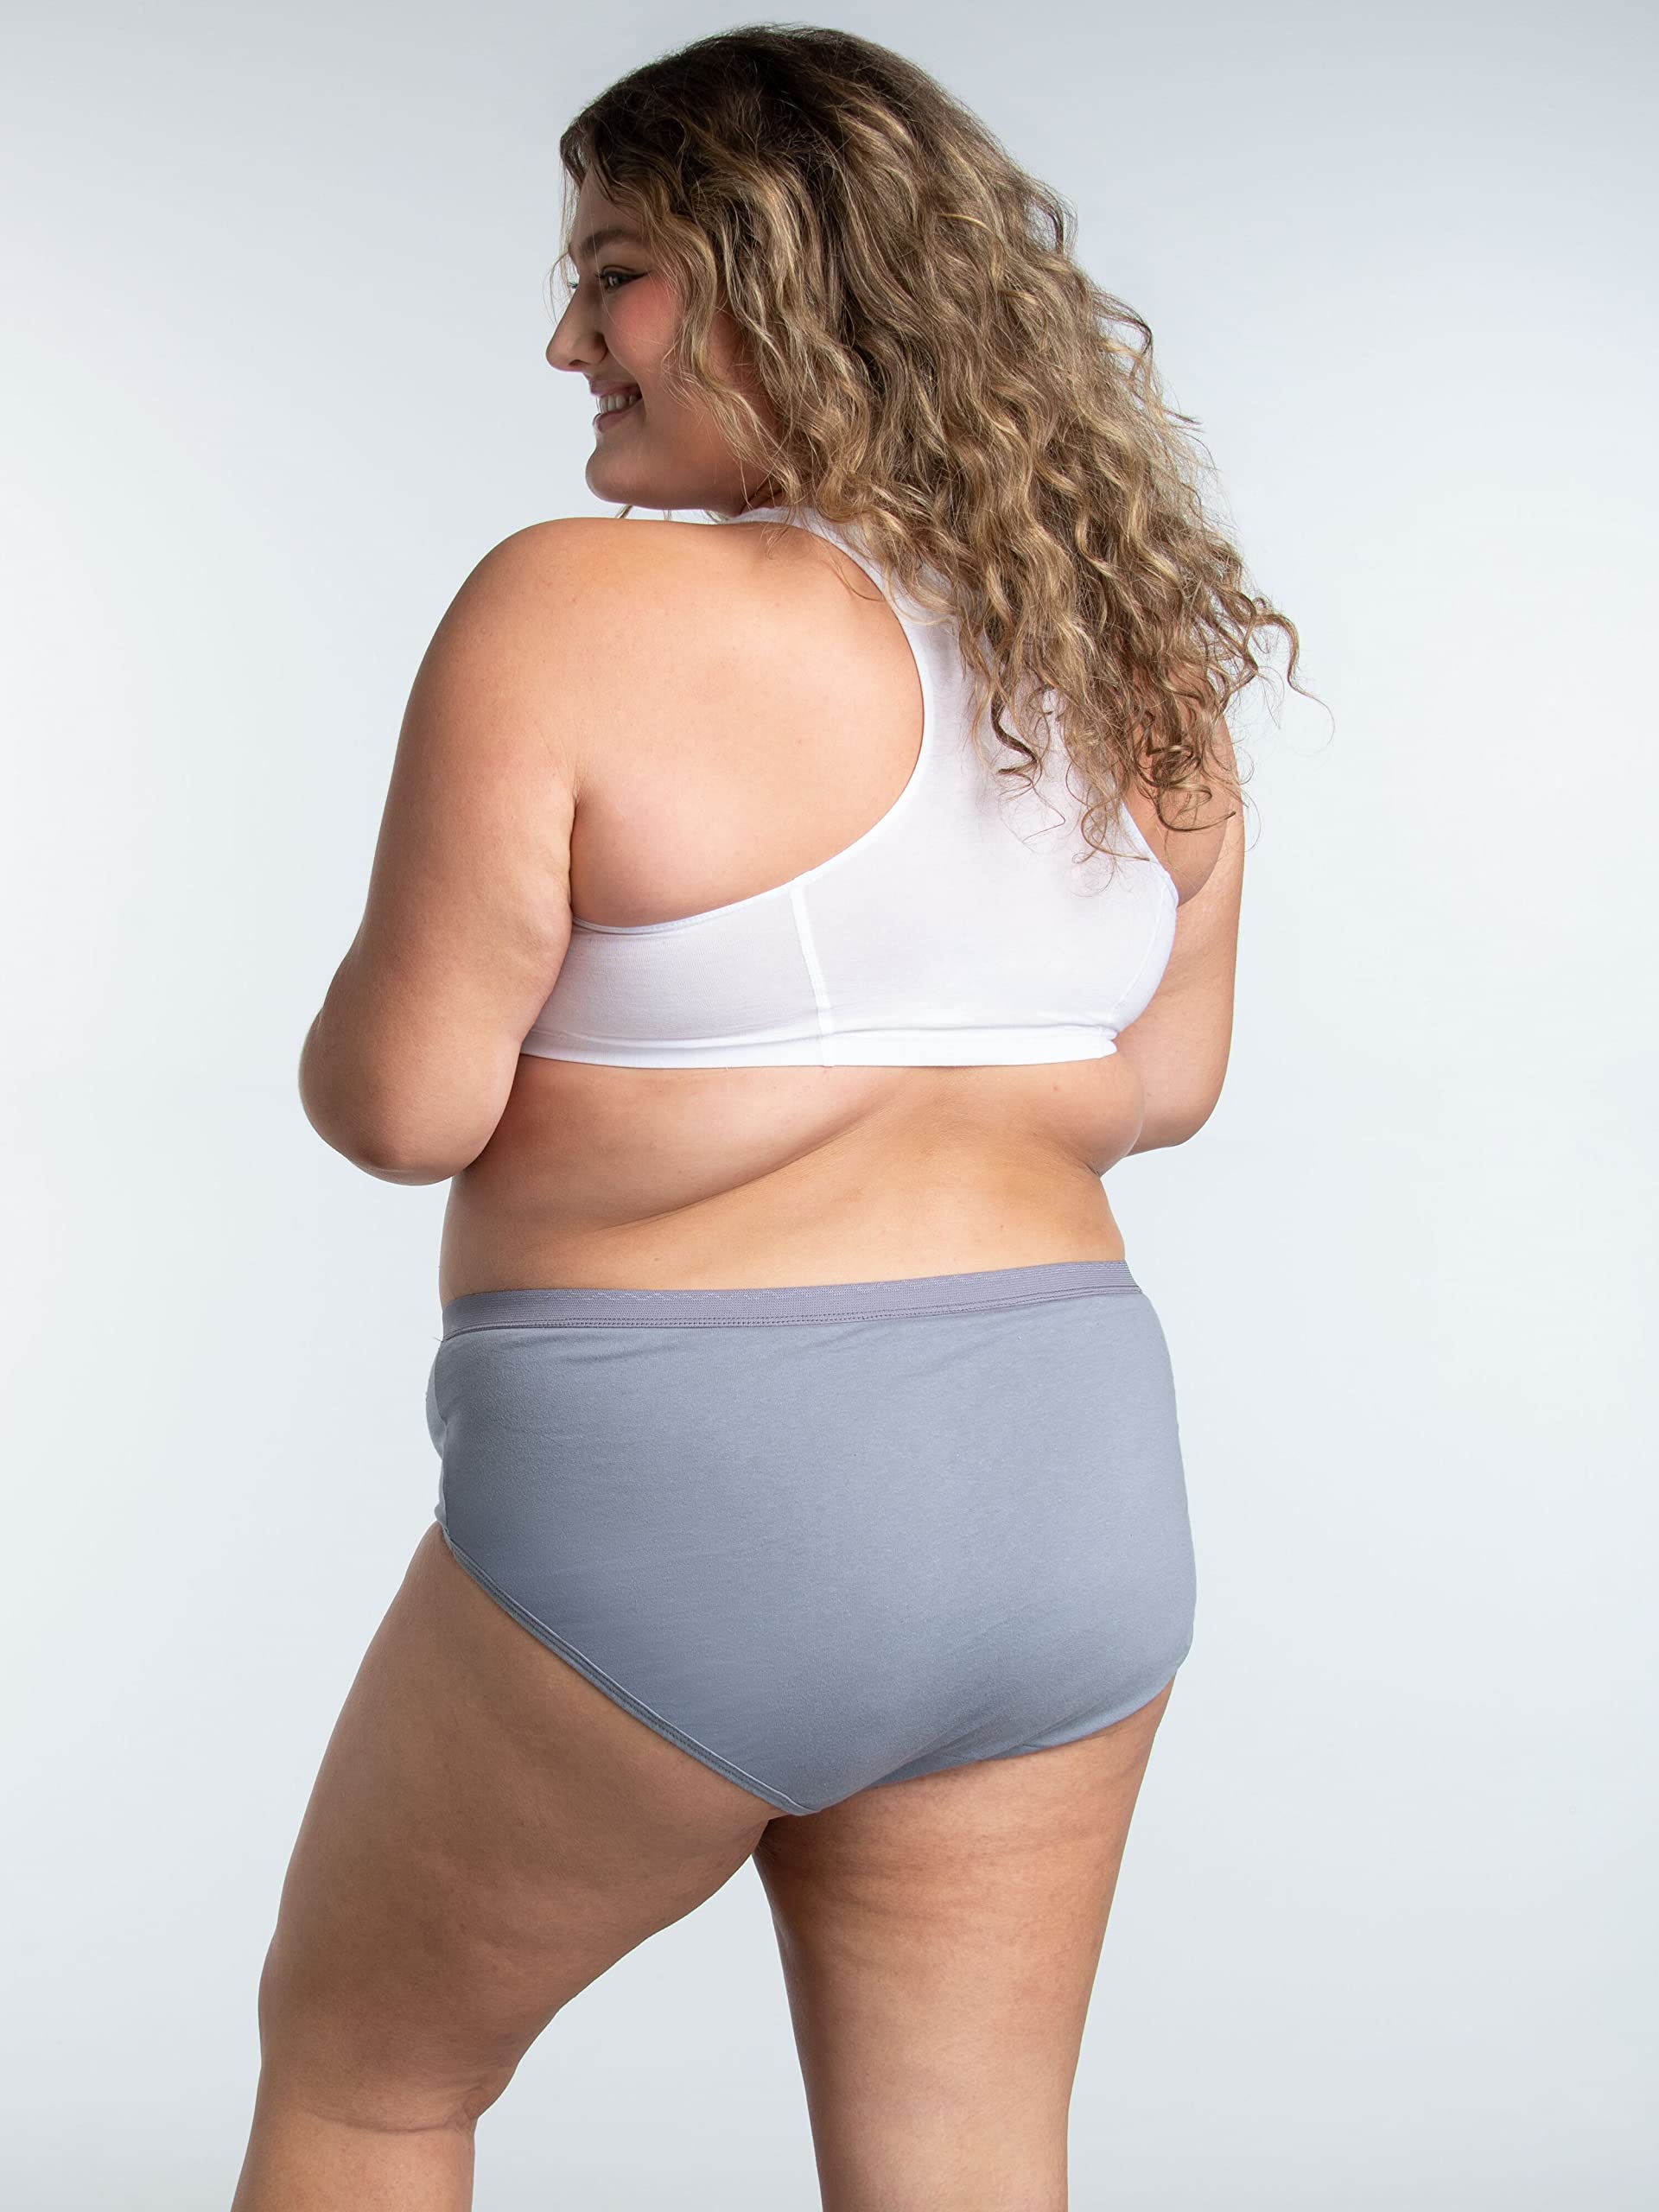 Fruit of the Loom Women's Fit for Me Plus Size Underwear